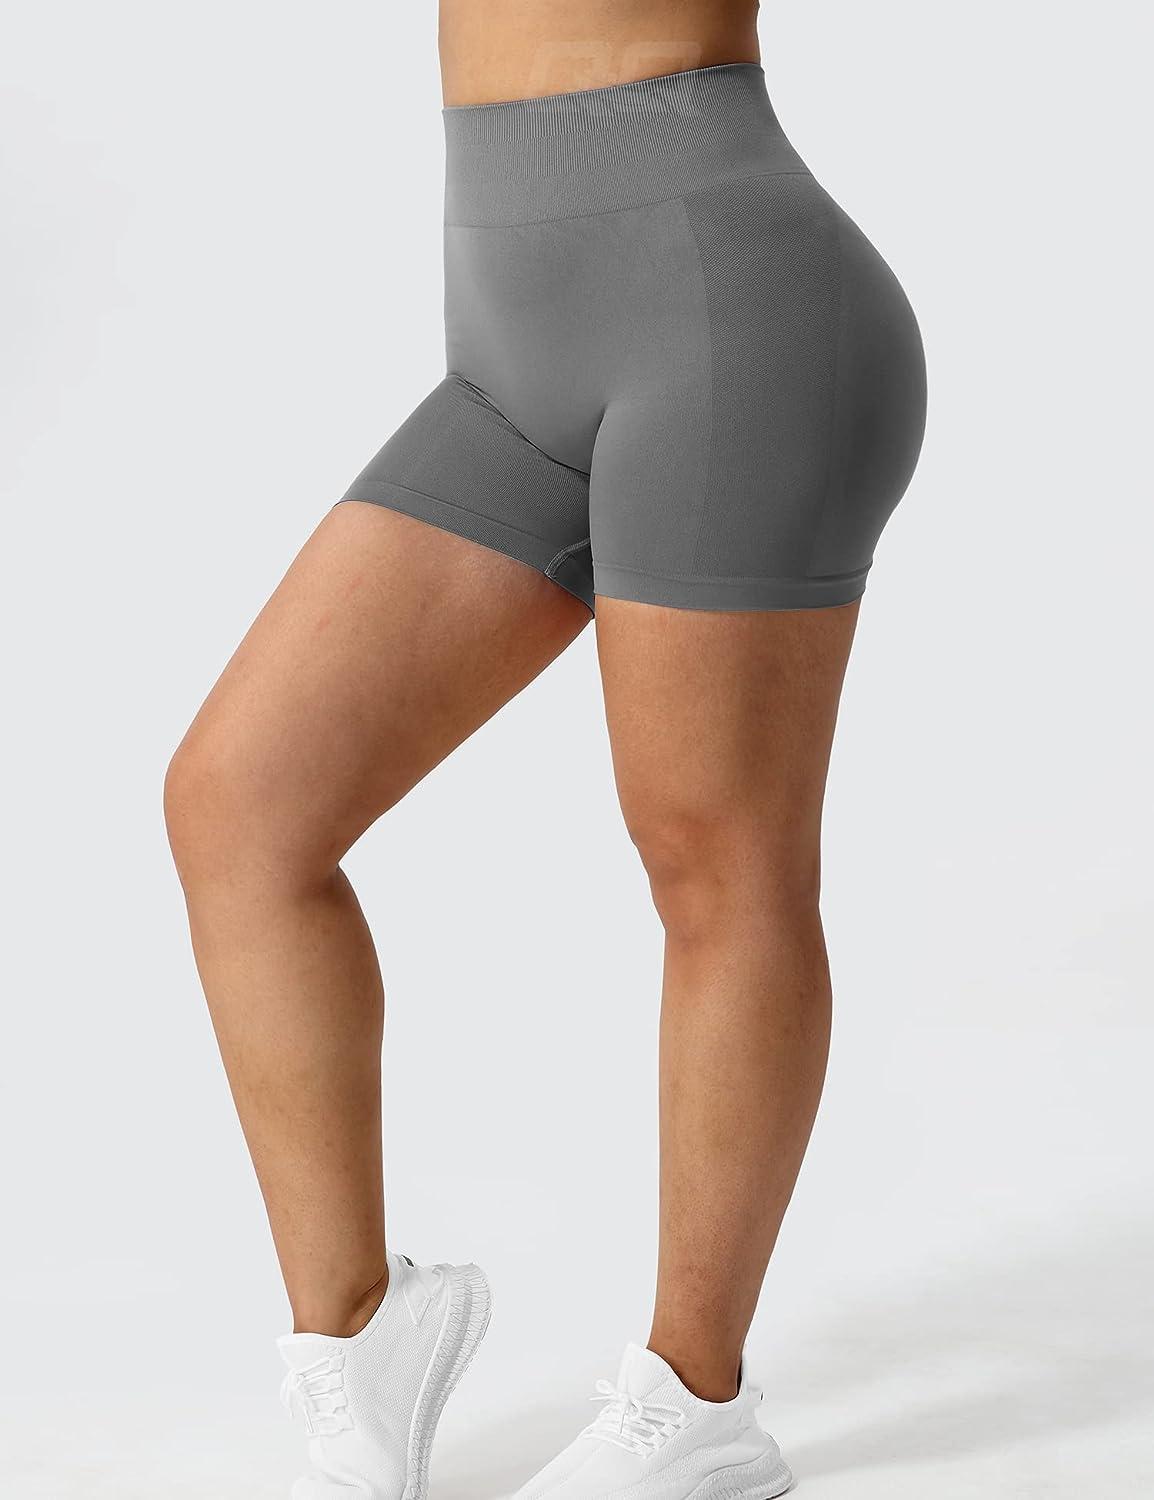 Yoga Shorts for Women Seamless High Waisted Butt Lifting Spandex